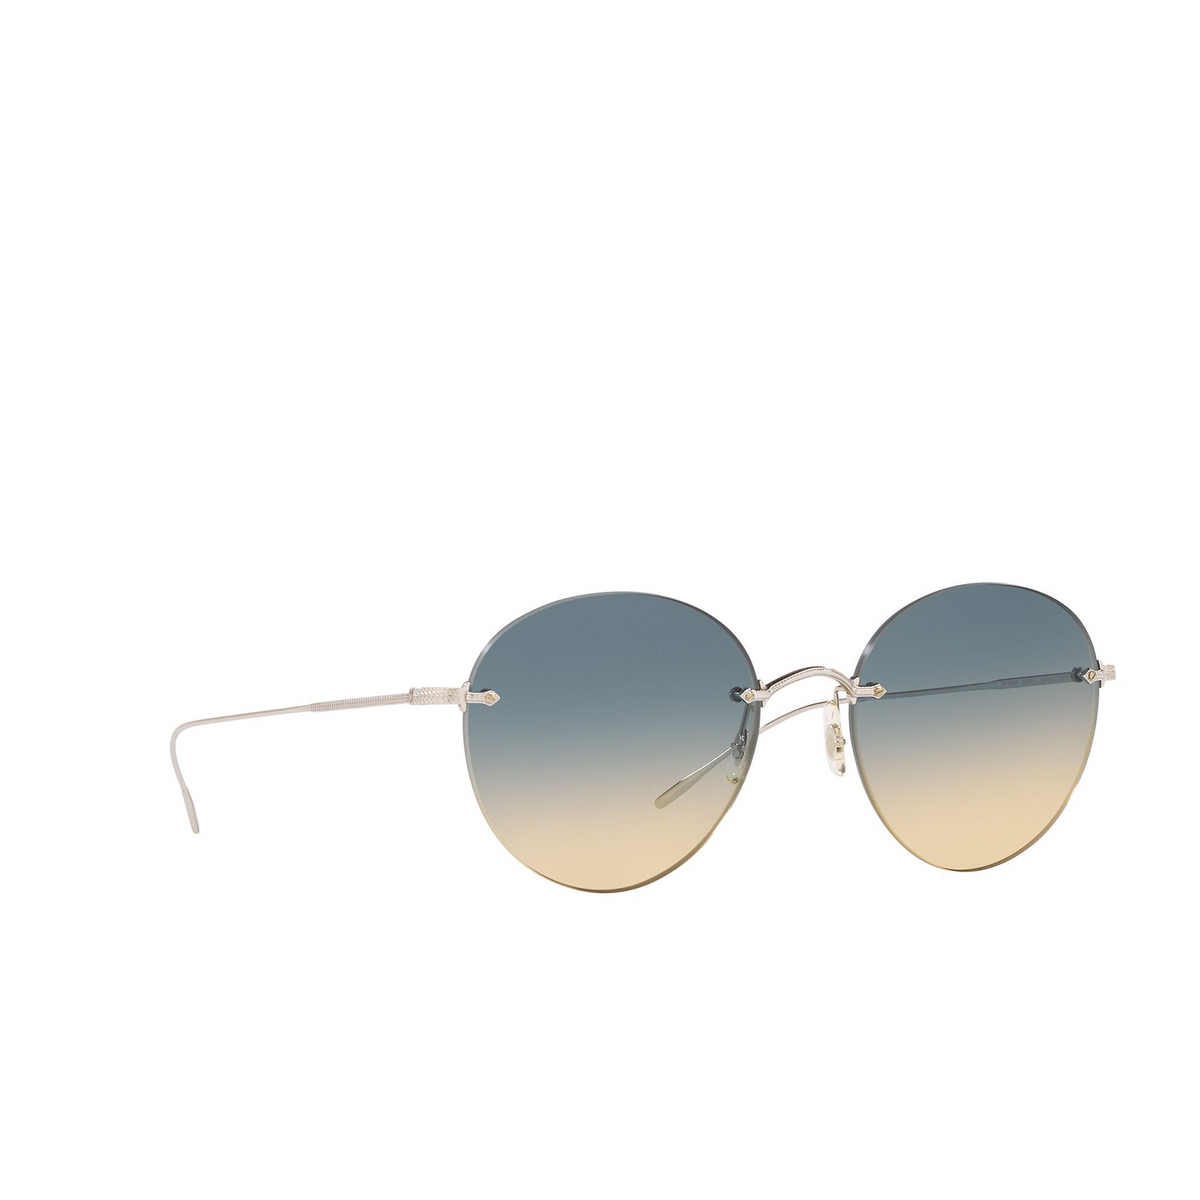 Oliver Peoples® Round Sunglasses: Coliena OV1264S color Silver 503679 - three-quarters view.